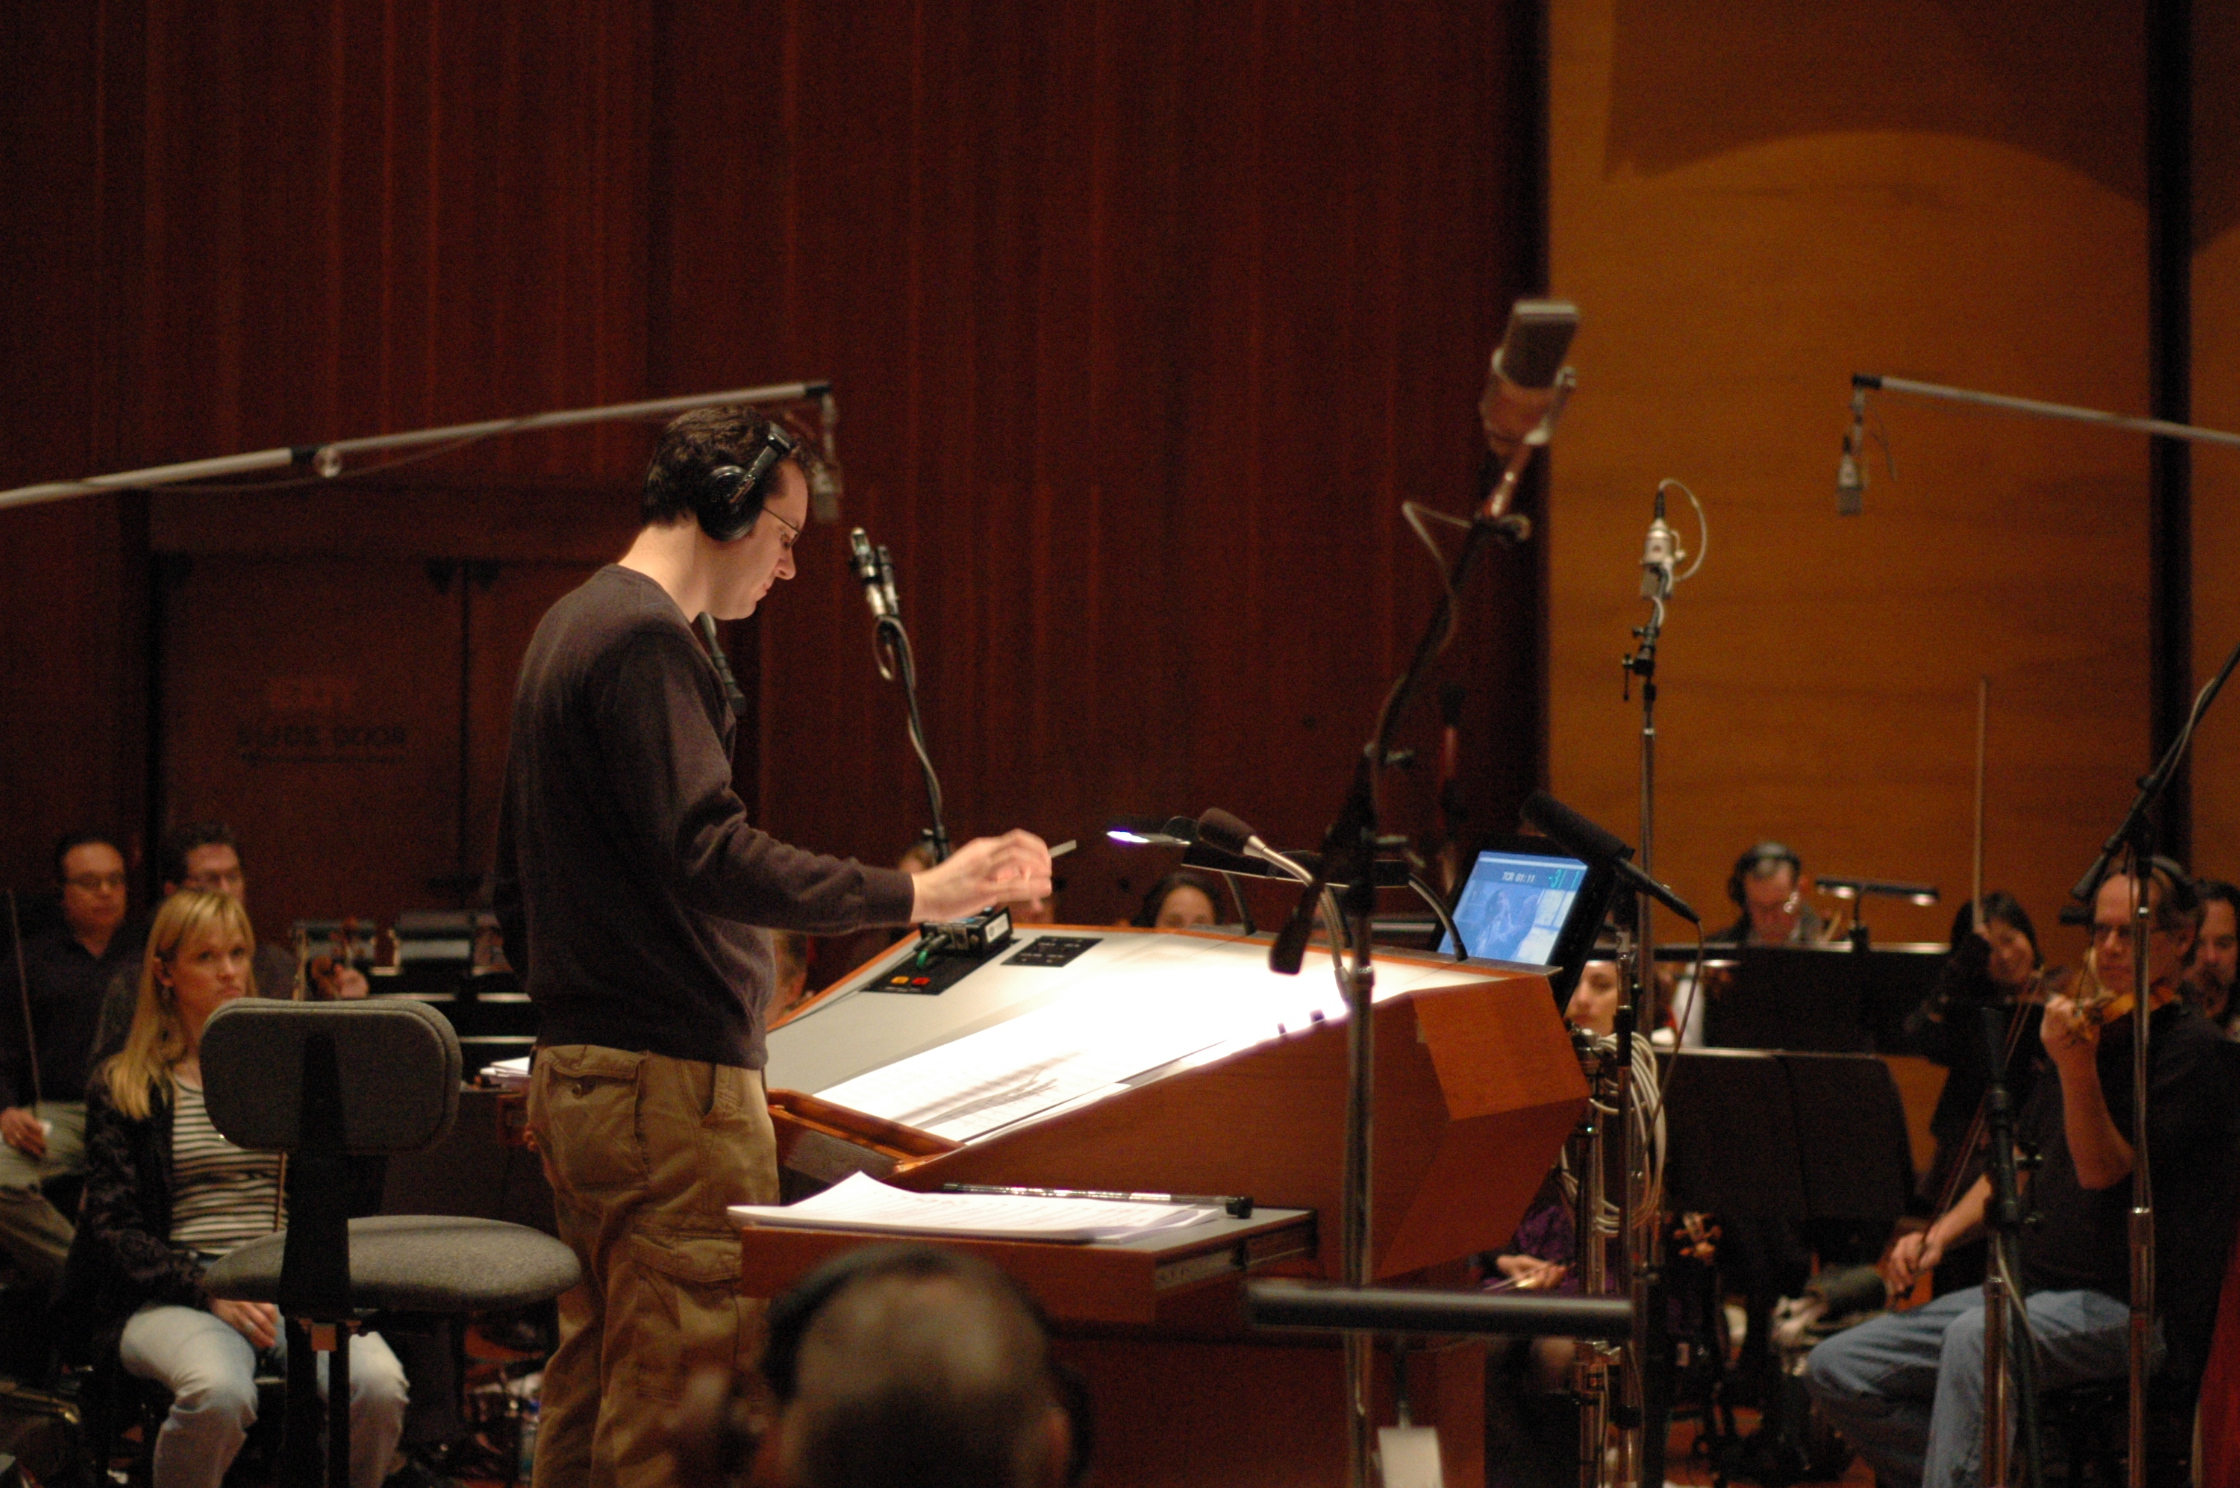 David and Fatima scoring session, conducting the Hollywood Studio Symphony Orchestra